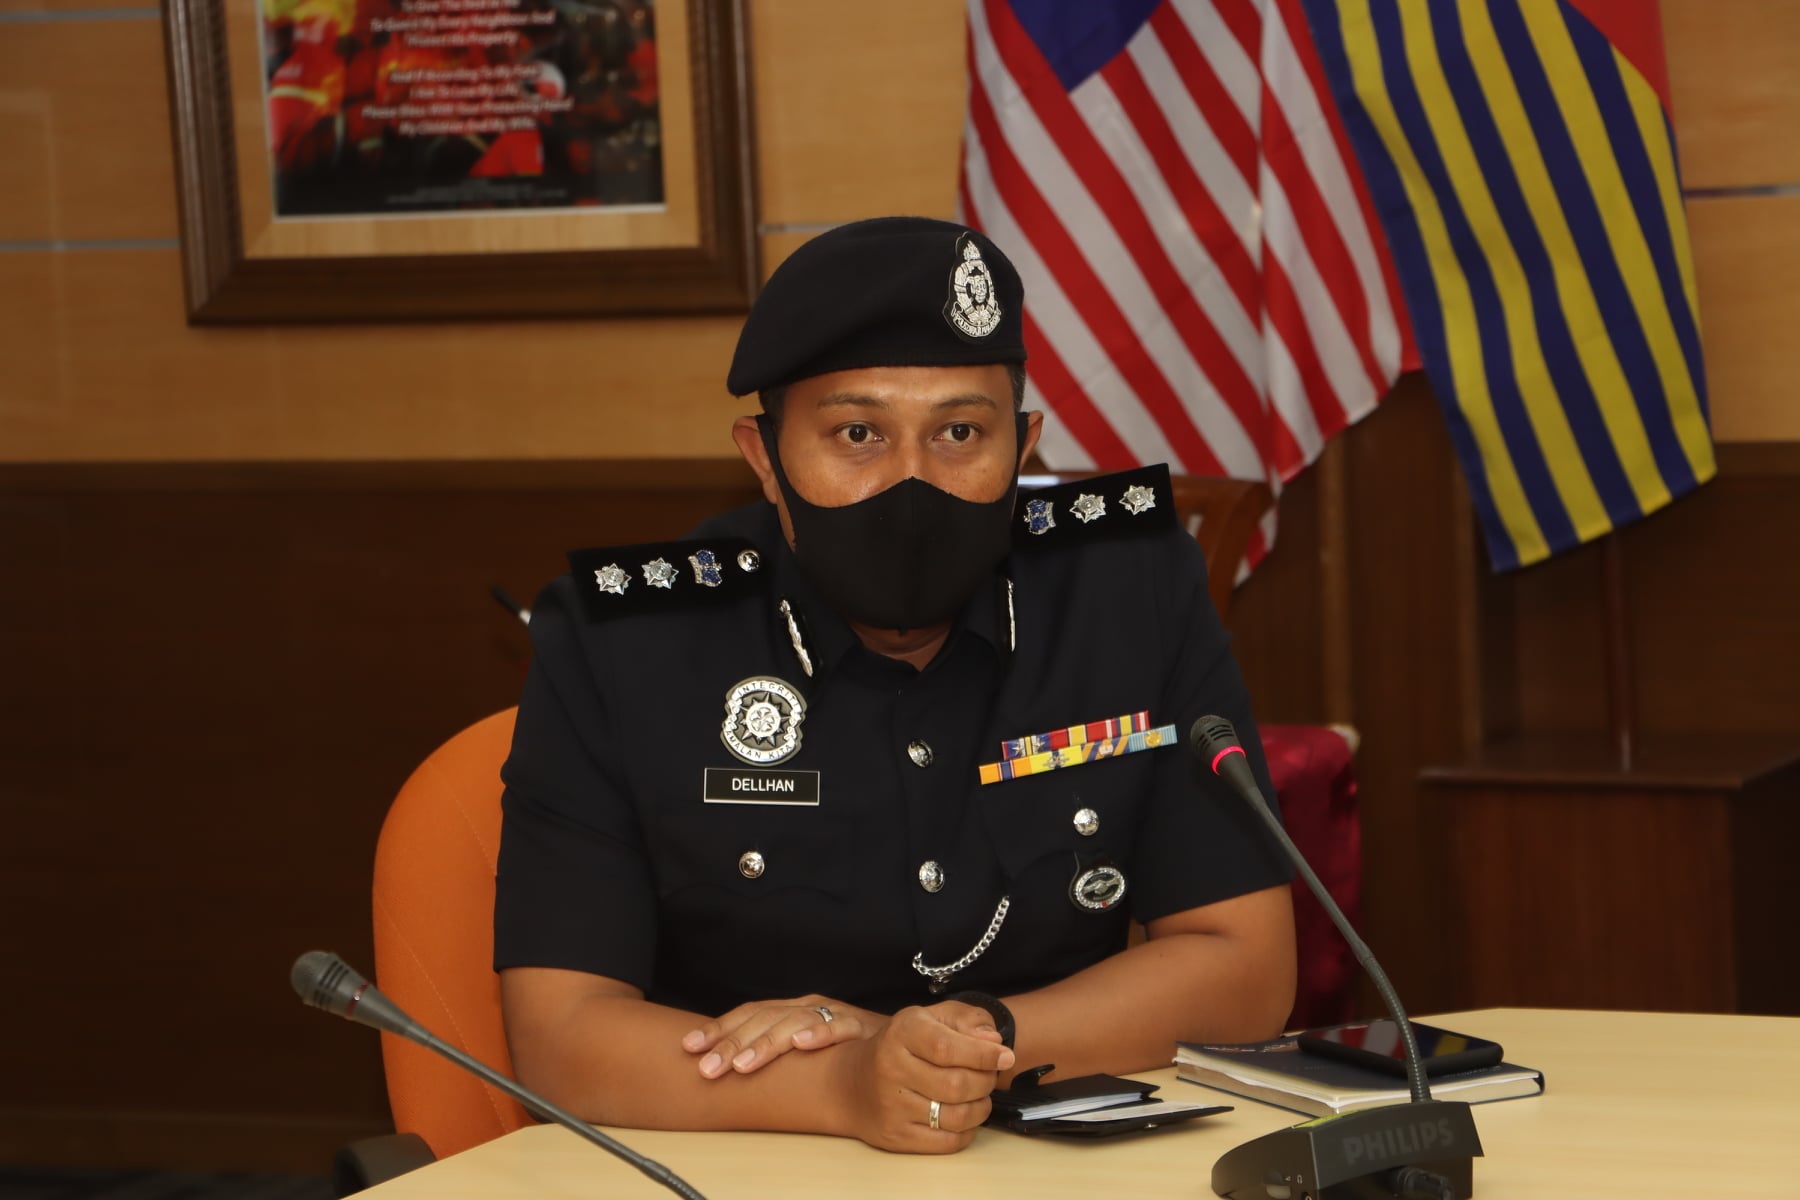 A photo of ACP Noor Dellhan Yahya, who has announced the road closures ahead of the scheduled Anti-MACC rally.